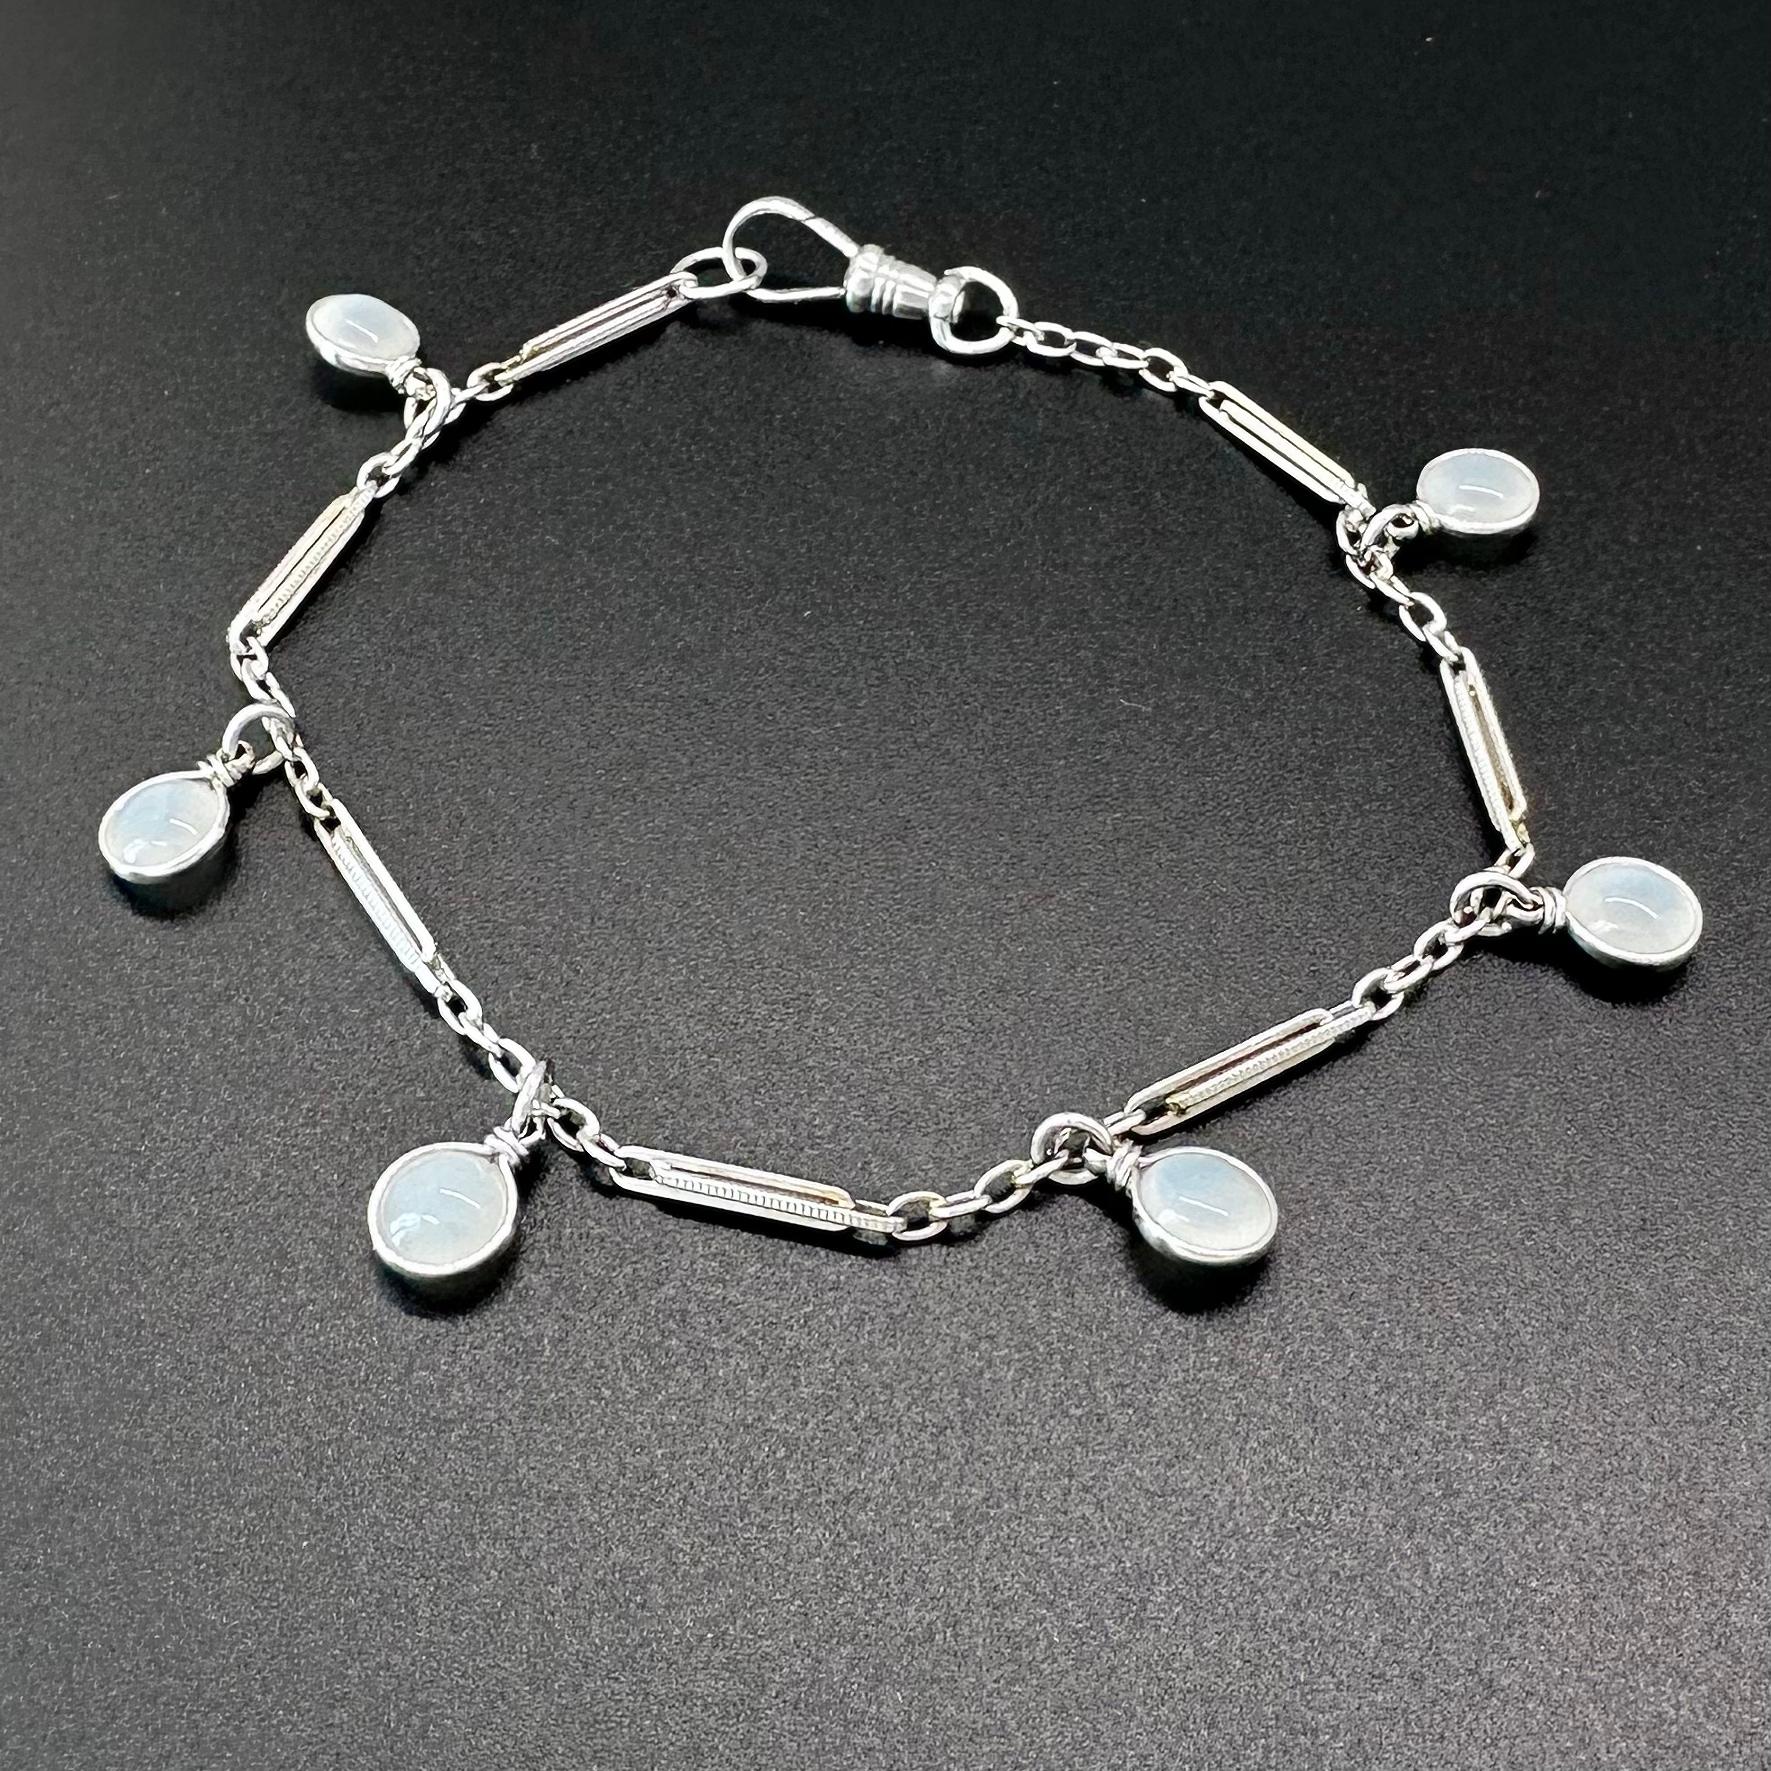 This lovely, elevated charm bracelet features an 14k white gold upcycled vintage watch fob chain paired with six lentil cut natural moonstone dangles. 

The simplicity and subtle glow of the gems highlights the beautiful antique style of the chain,